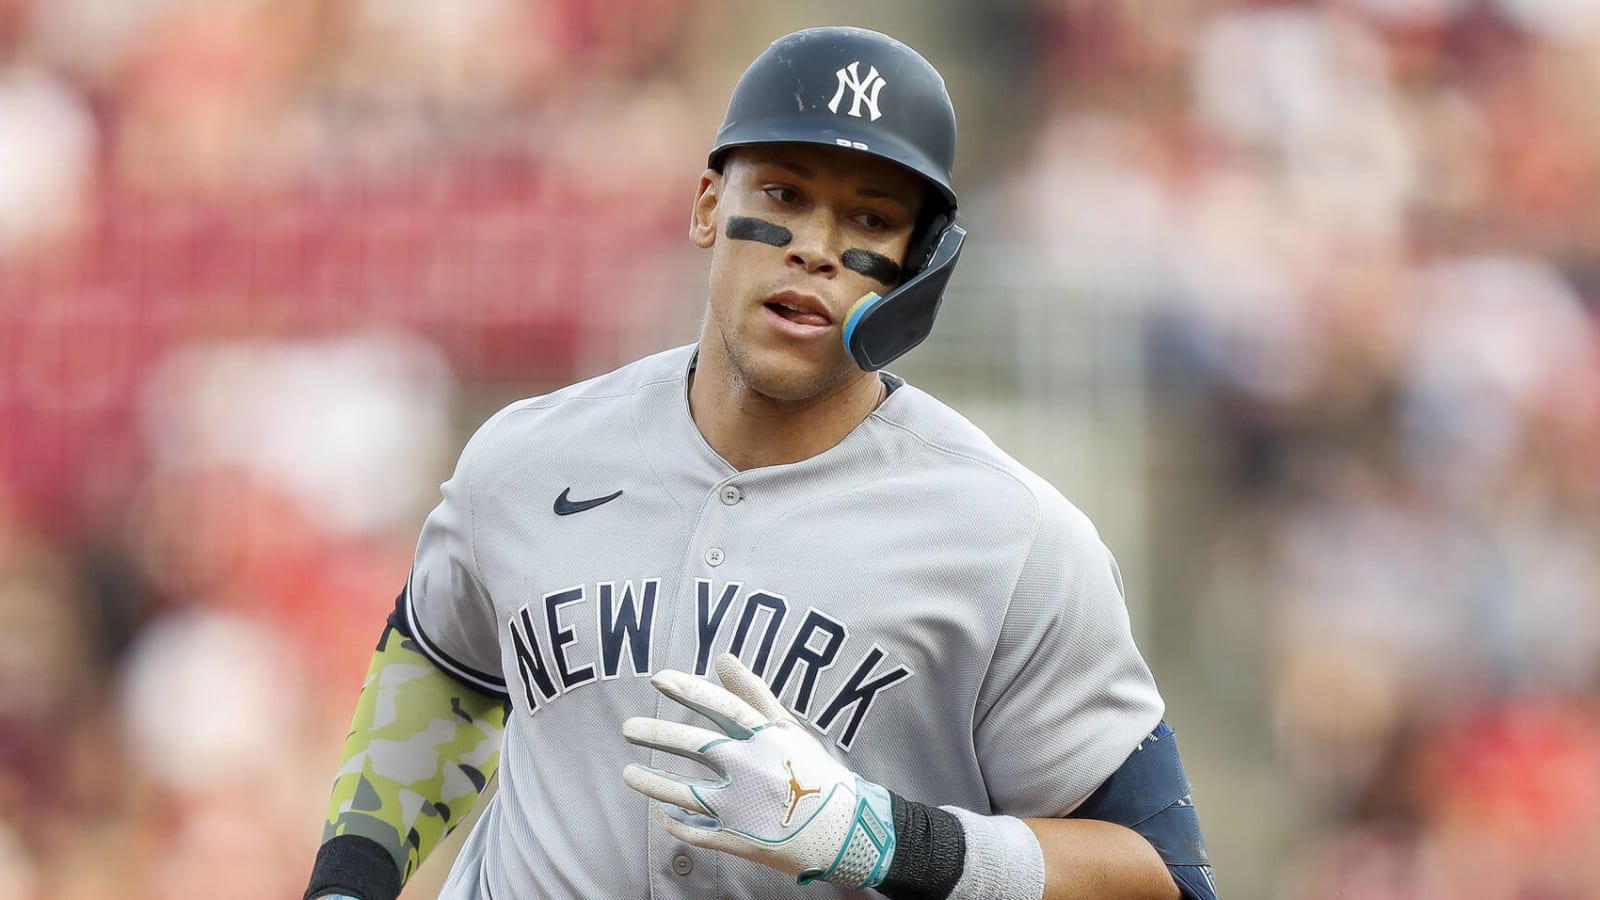 Yankees manager provides update on Aaron Judge injury